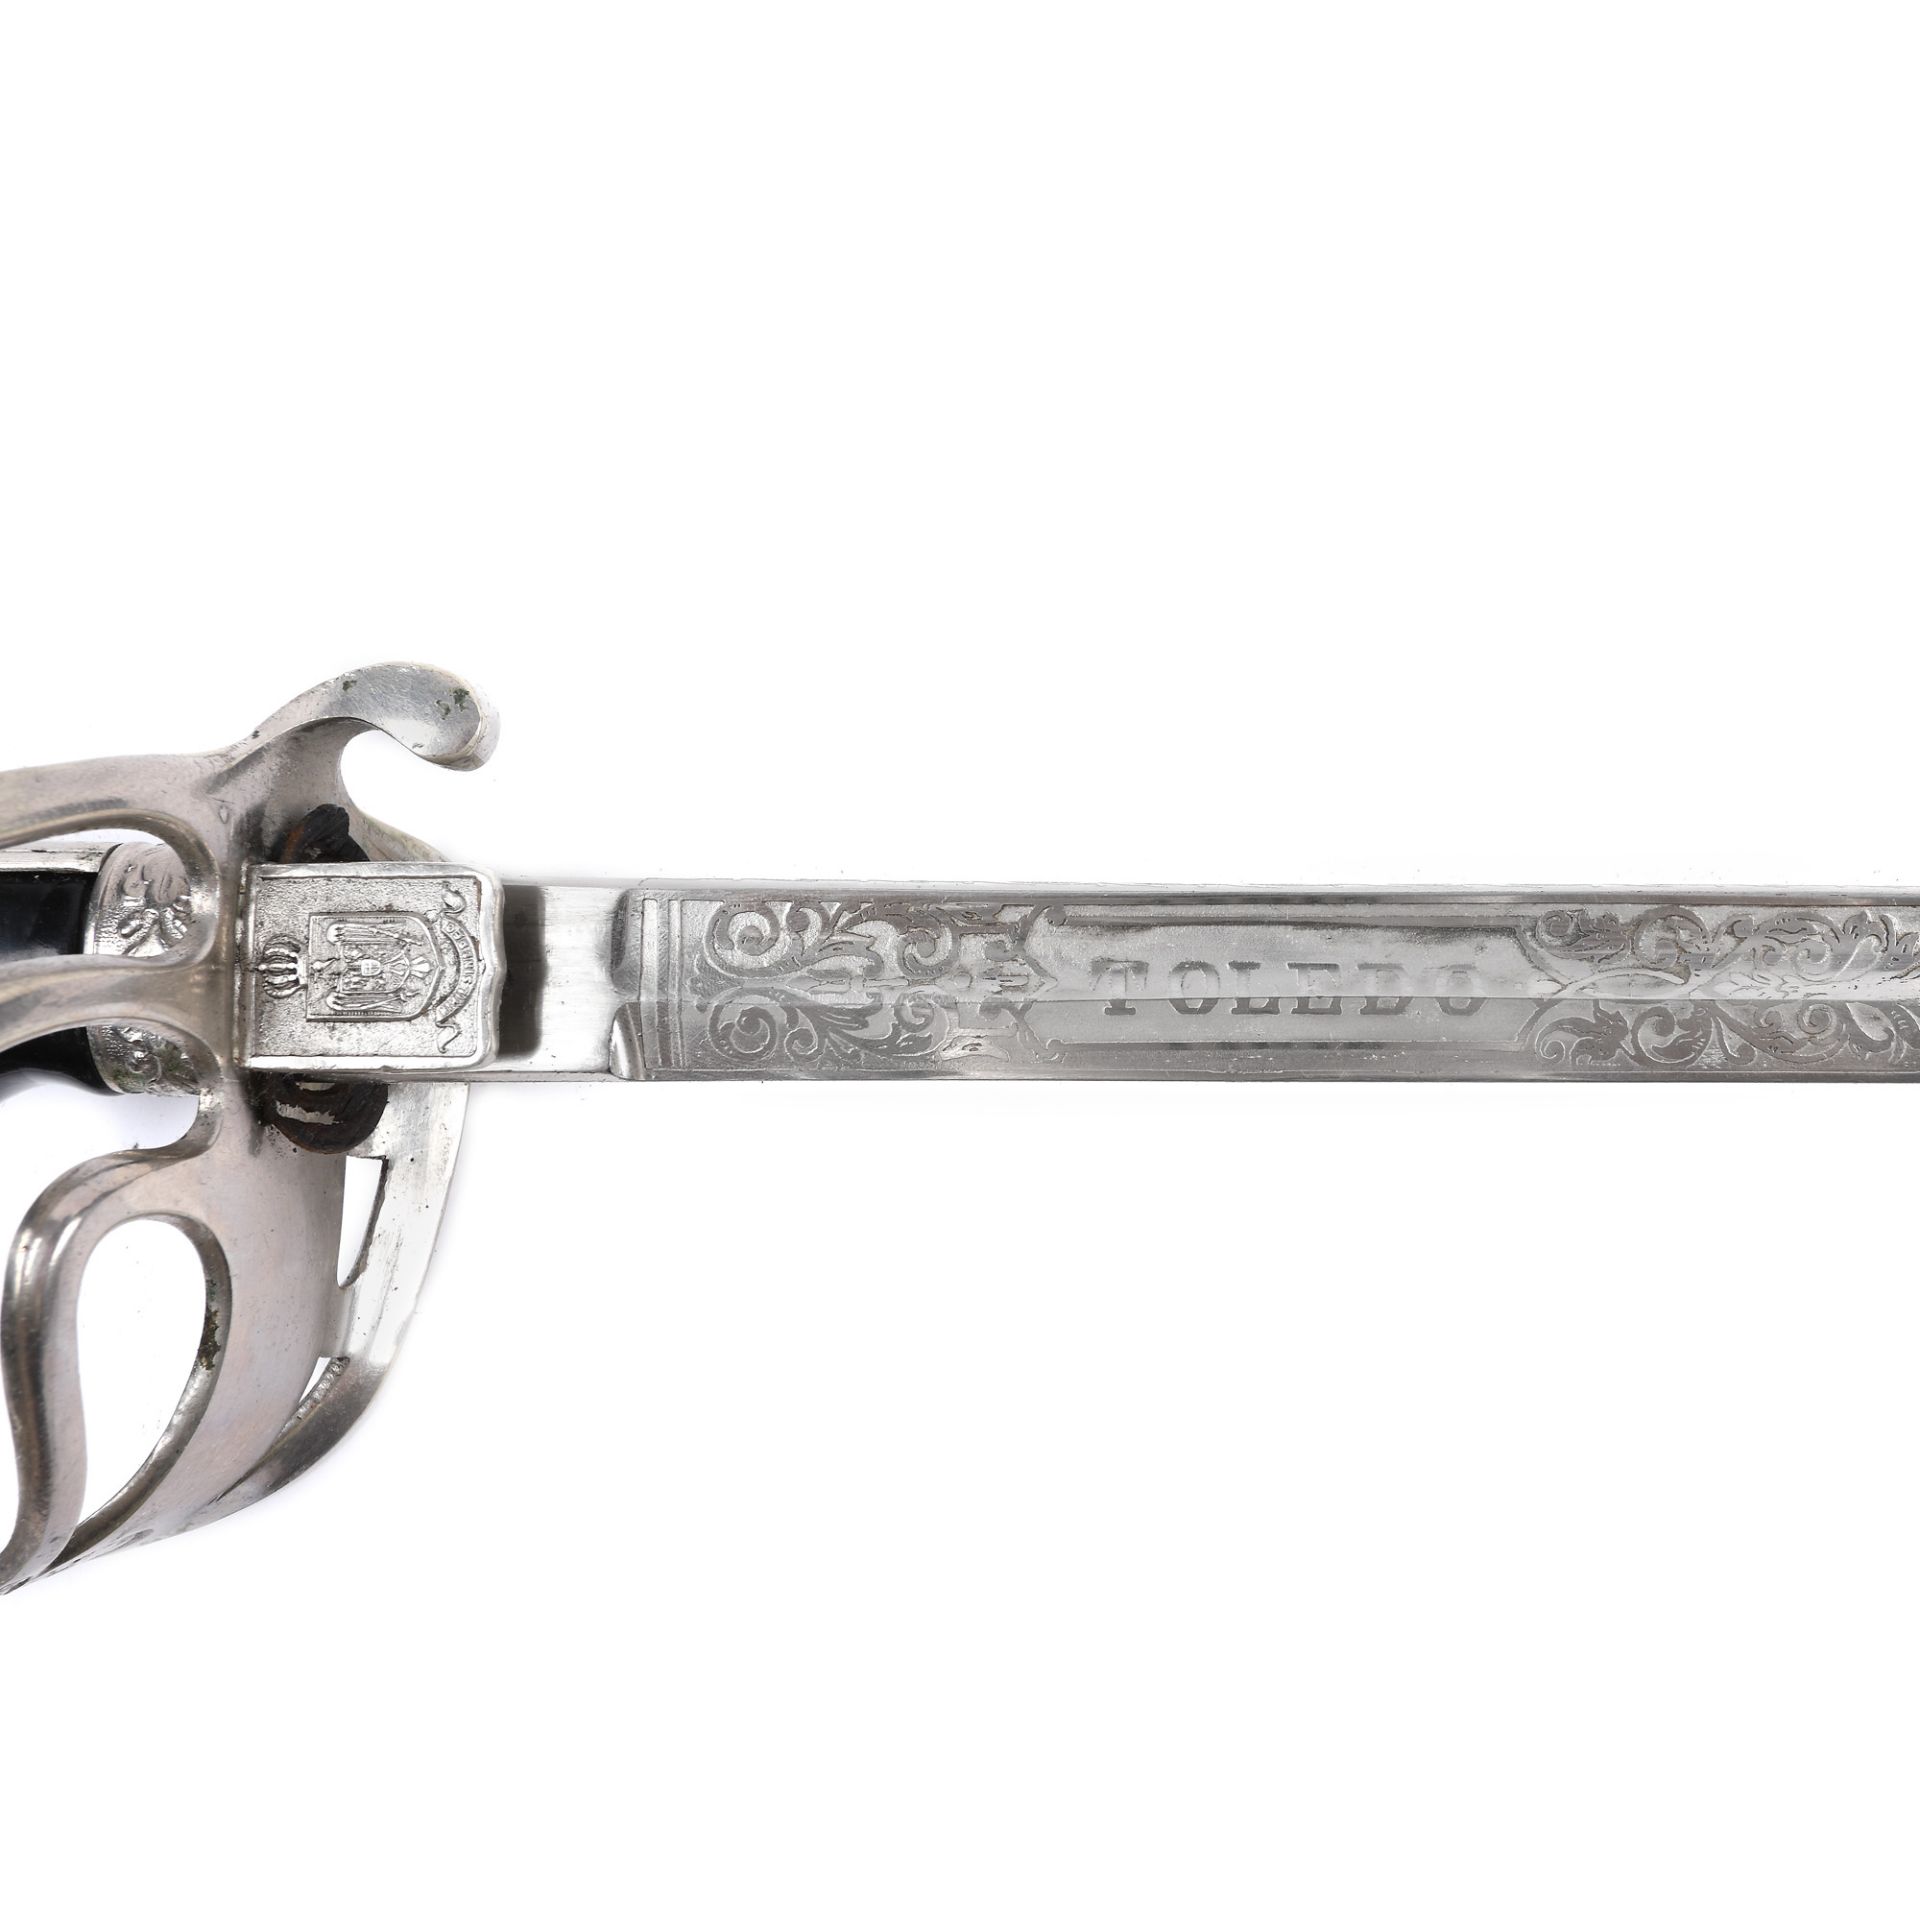 Officer's sword, with the cipher of King Ferdinand, with sheath - Image 4 of 5